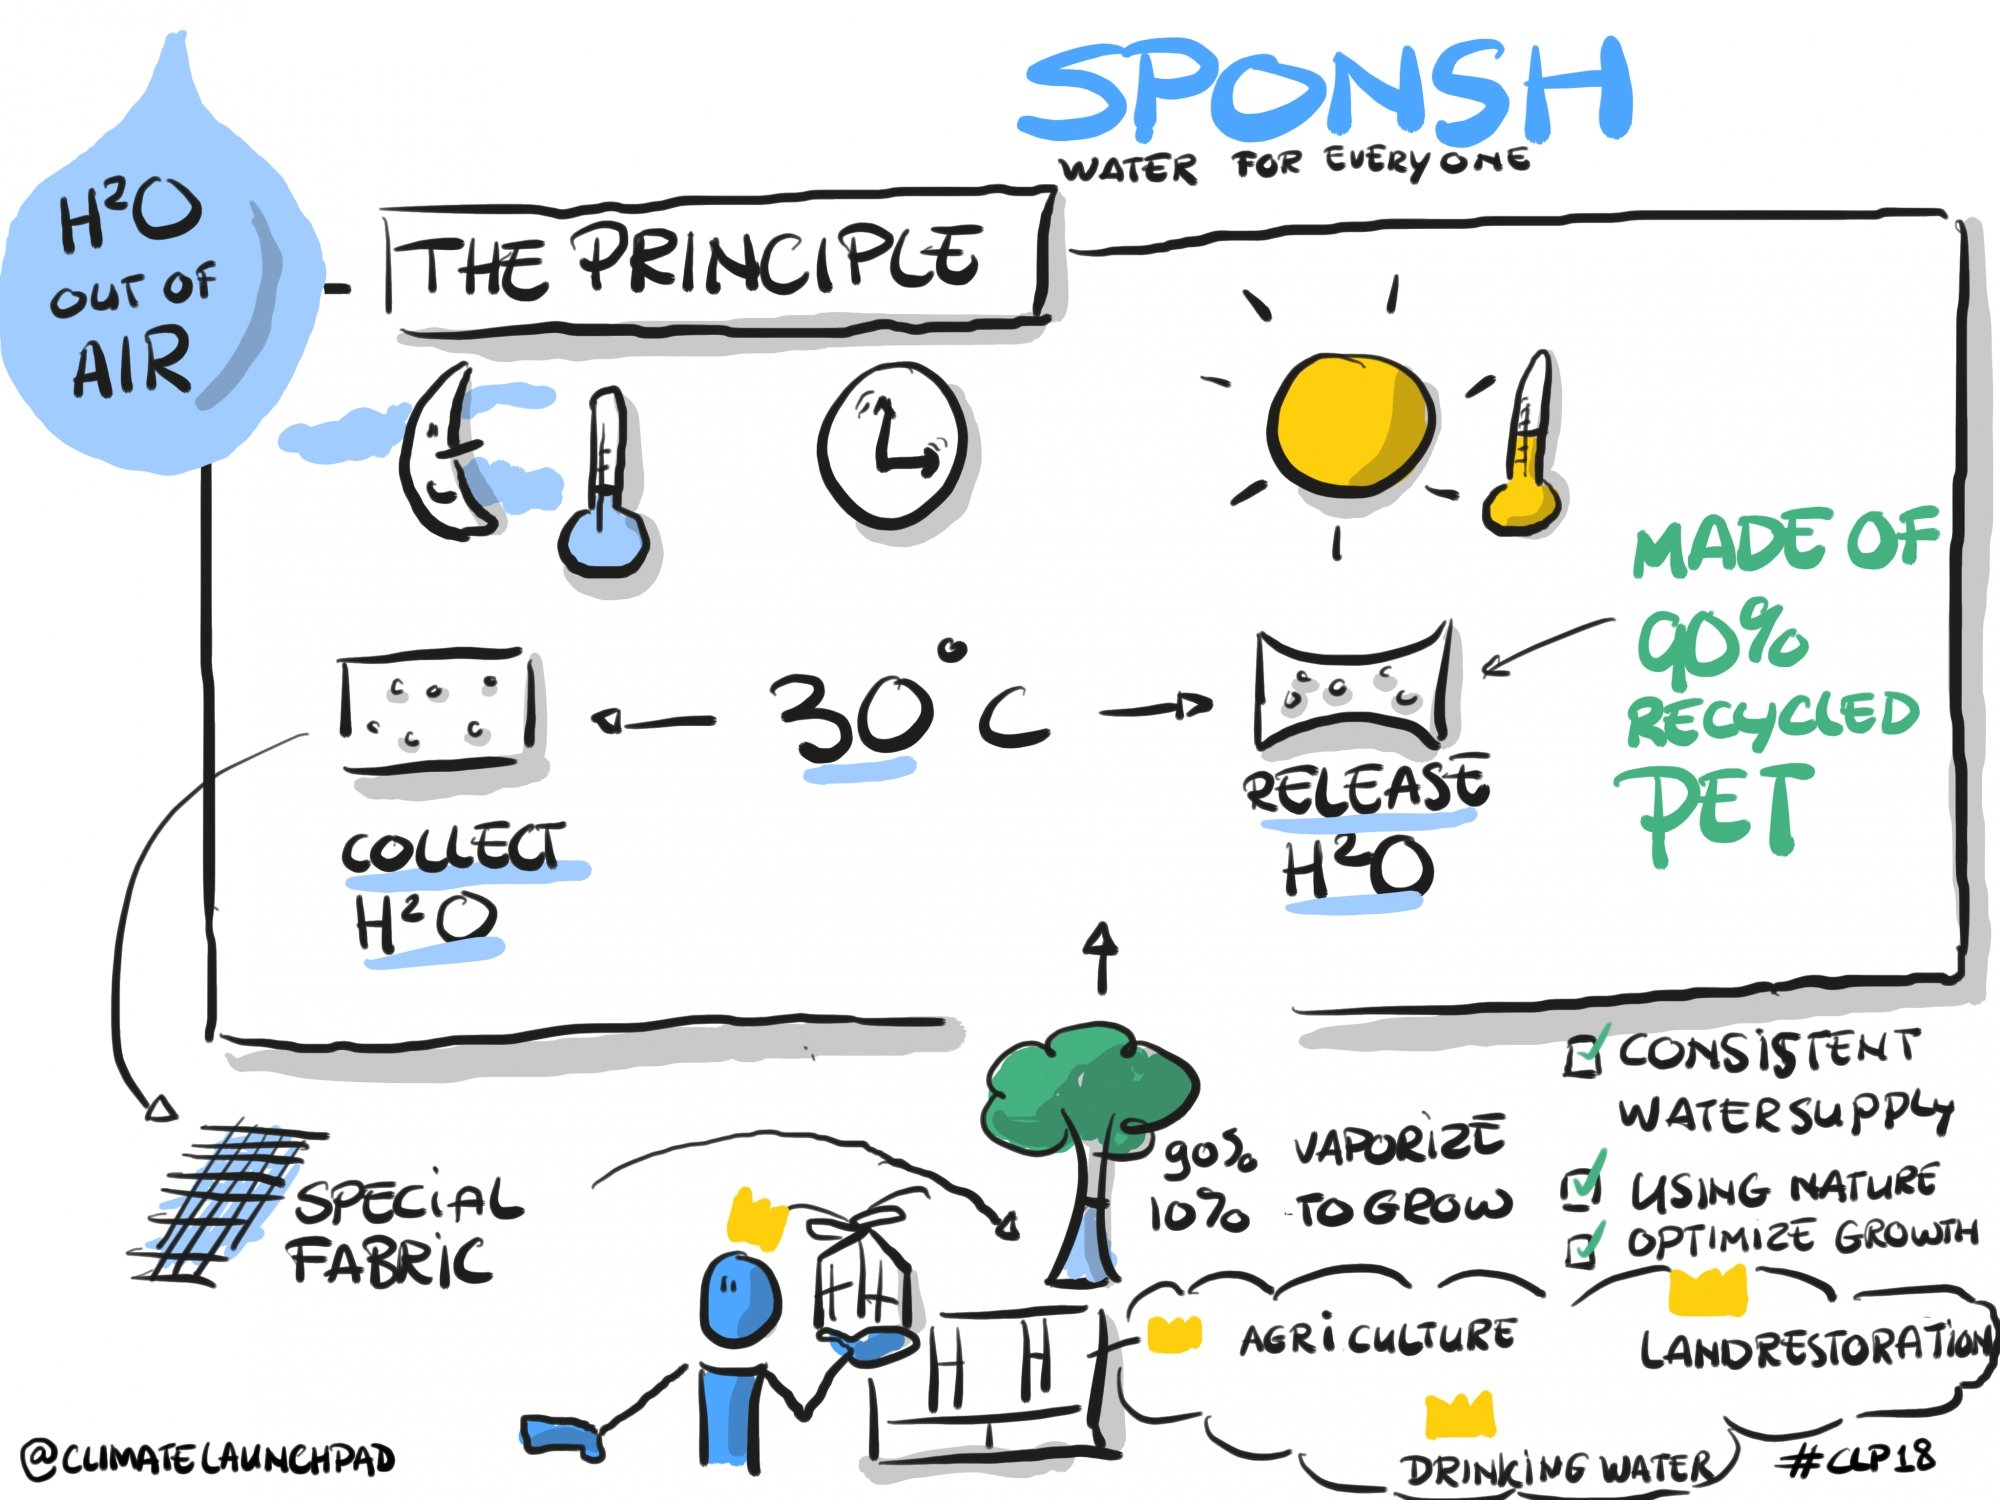 02_Sponsh explained in one drawing CLP18 (Henk Wijnands)